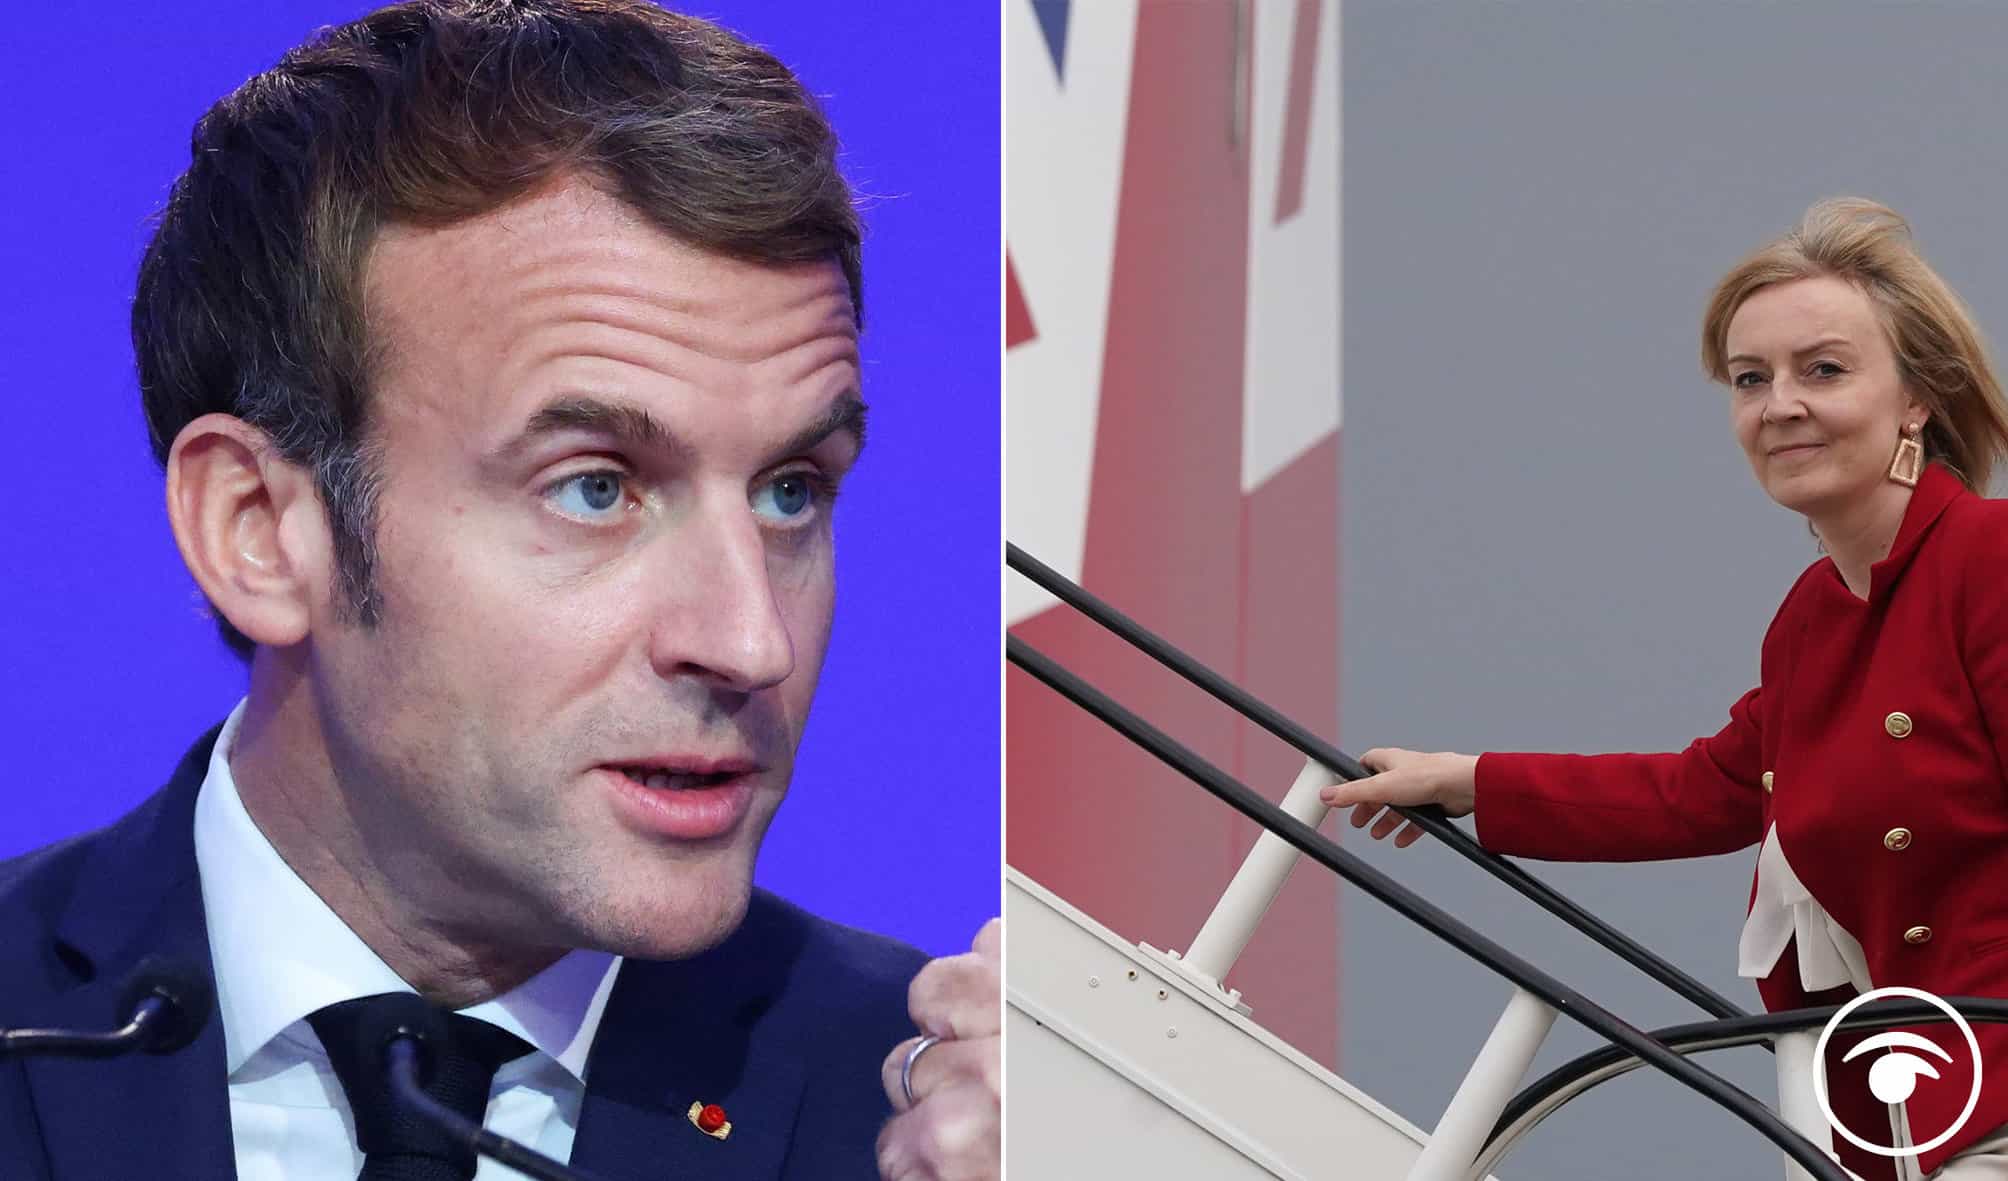 Now it is claimed Macron is ‘quivering in boots’ if Truss appoints Frost to deal with him